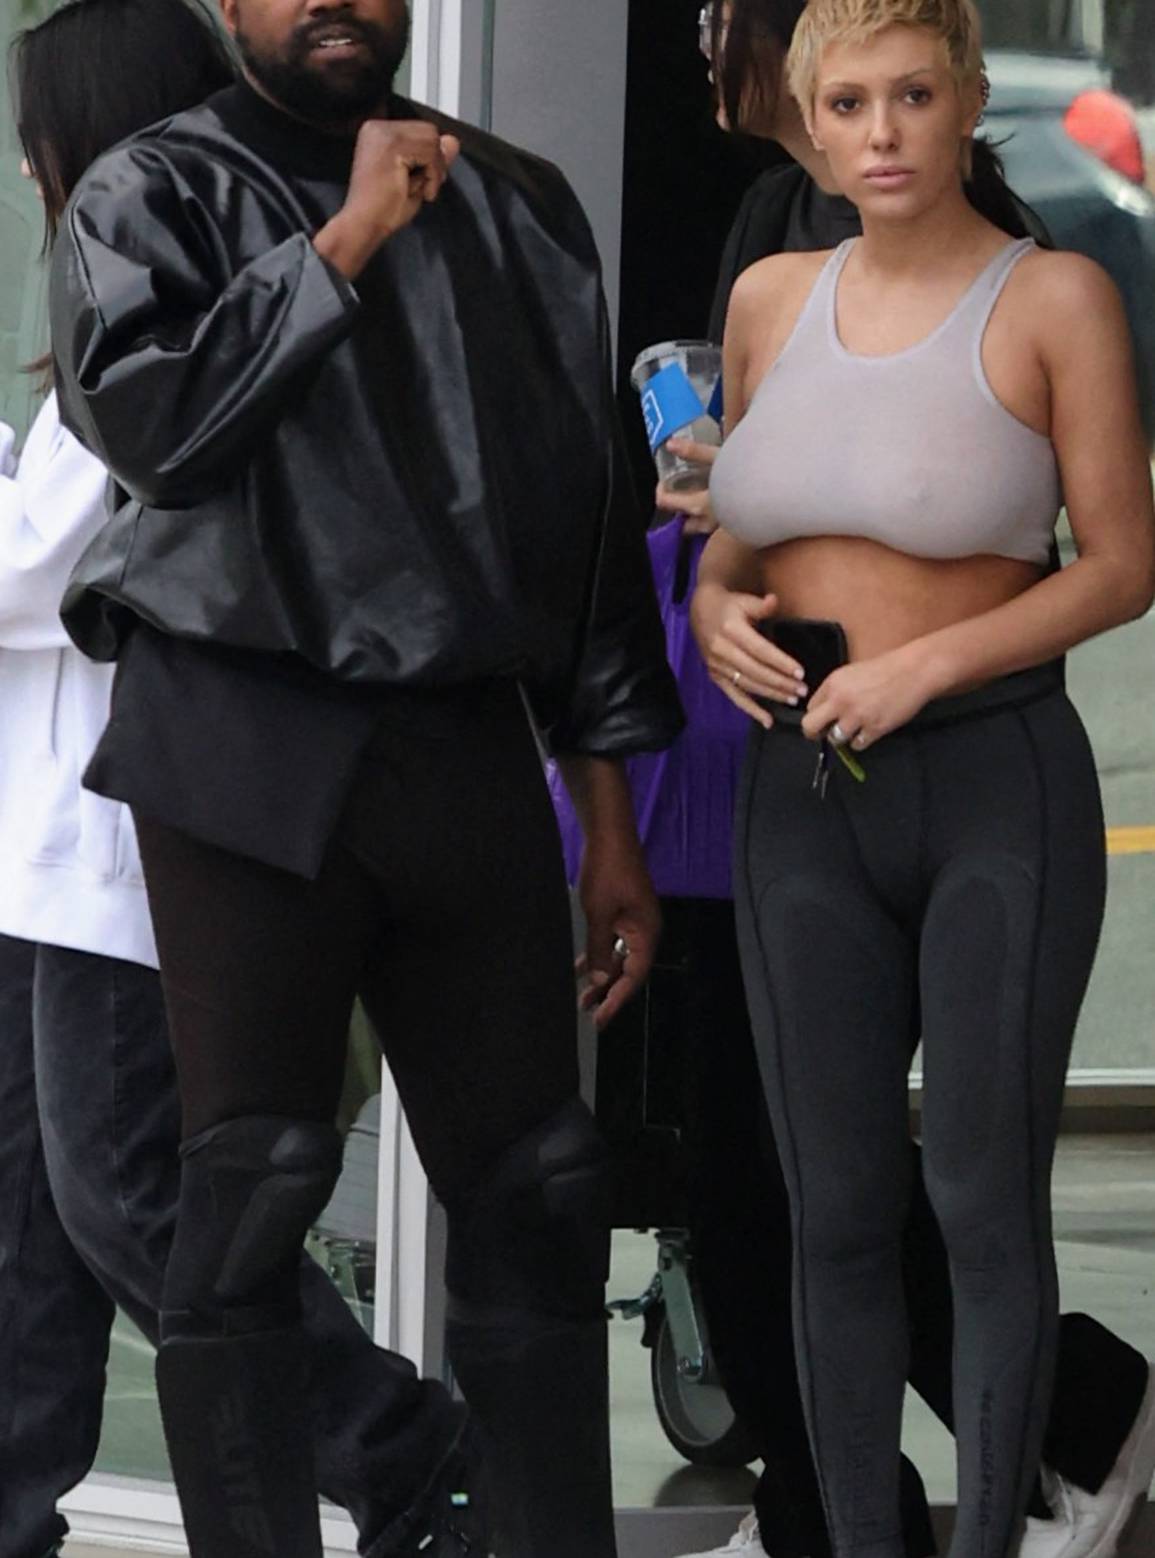 Kanye West seen in good spirits while shopping SUPREME and showing off his hummer with wife Bianca and friend